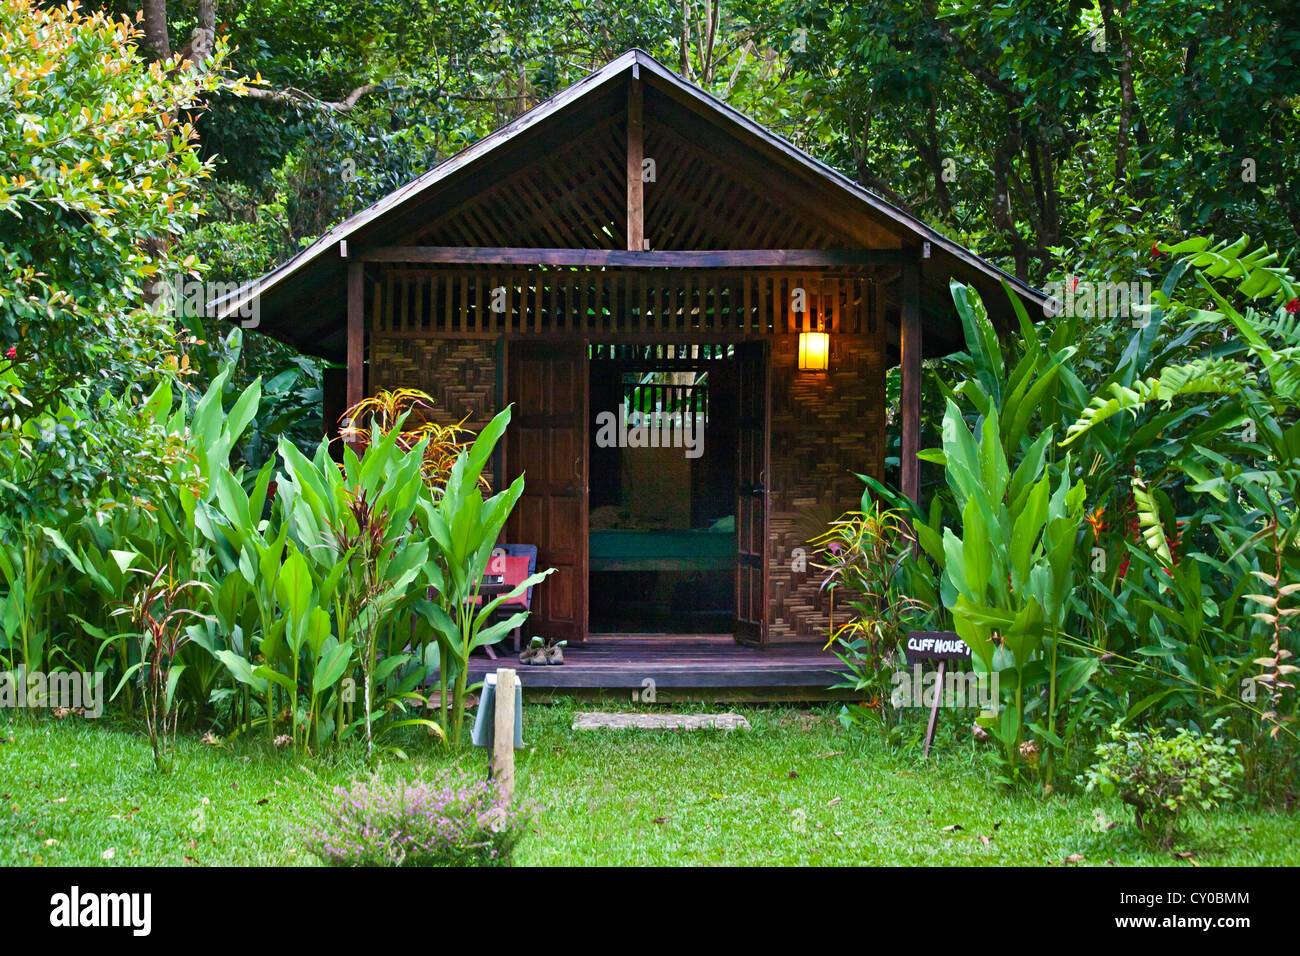 CLIFF HOUSE 1 at OUR JUNGLE HOUSE a lodge in the rainforest near KHAO SOK NATIONAL PARK - SURATHANI PROVENCE, THAILAND Stock Photo